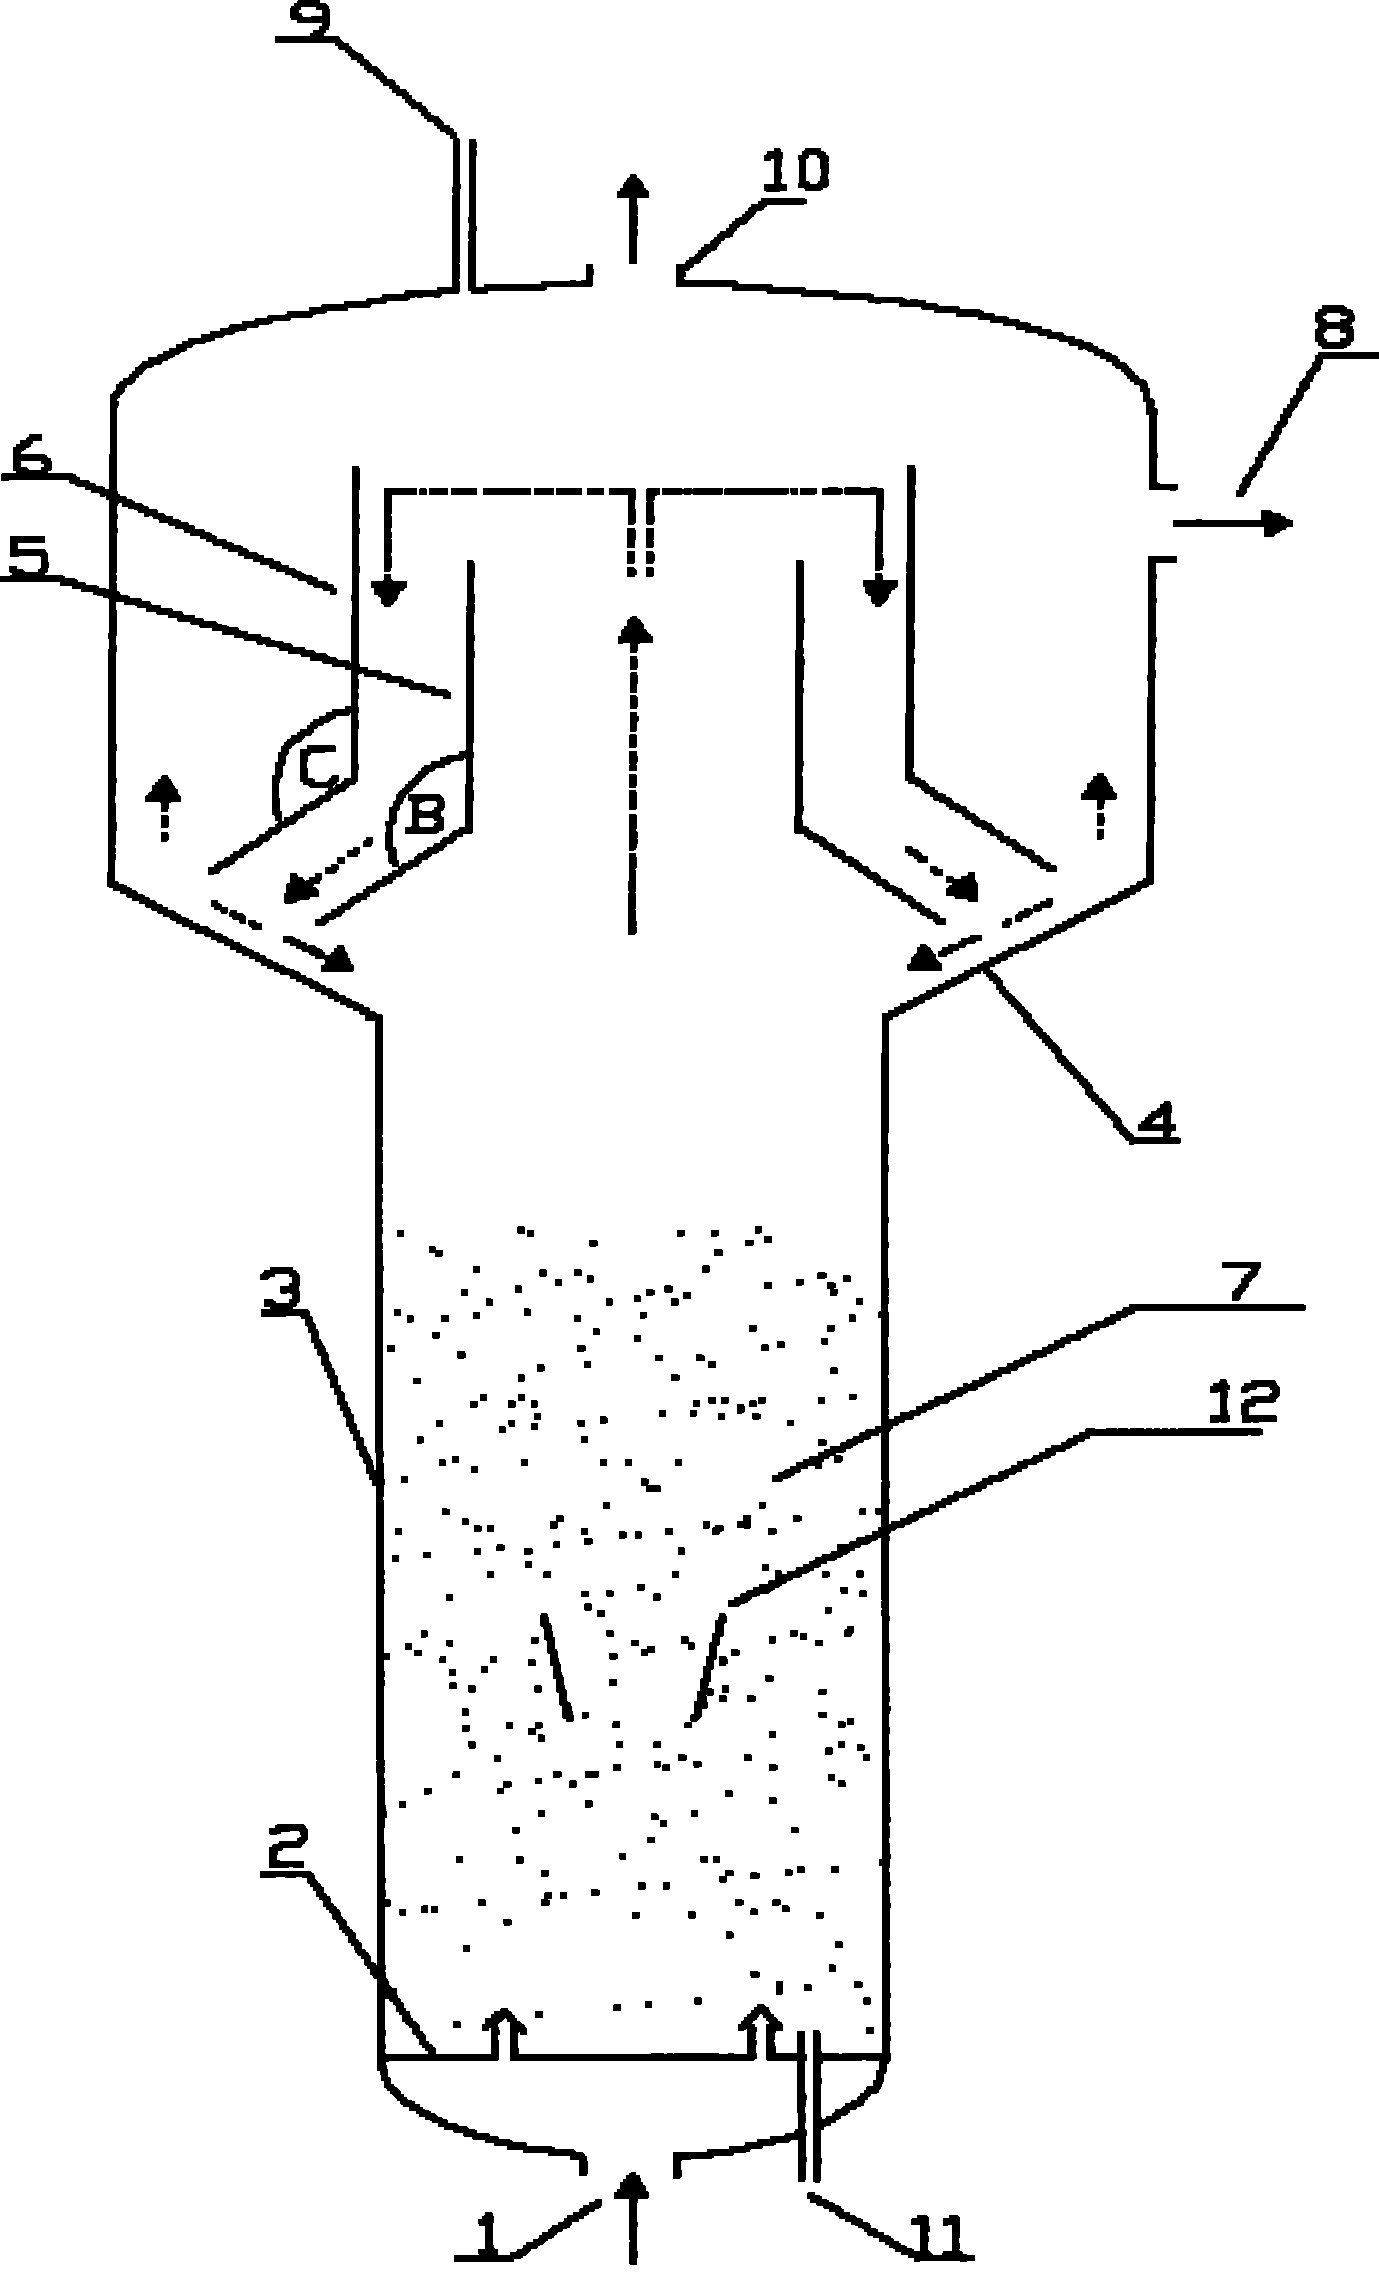 Three-phase boiling bed reactor